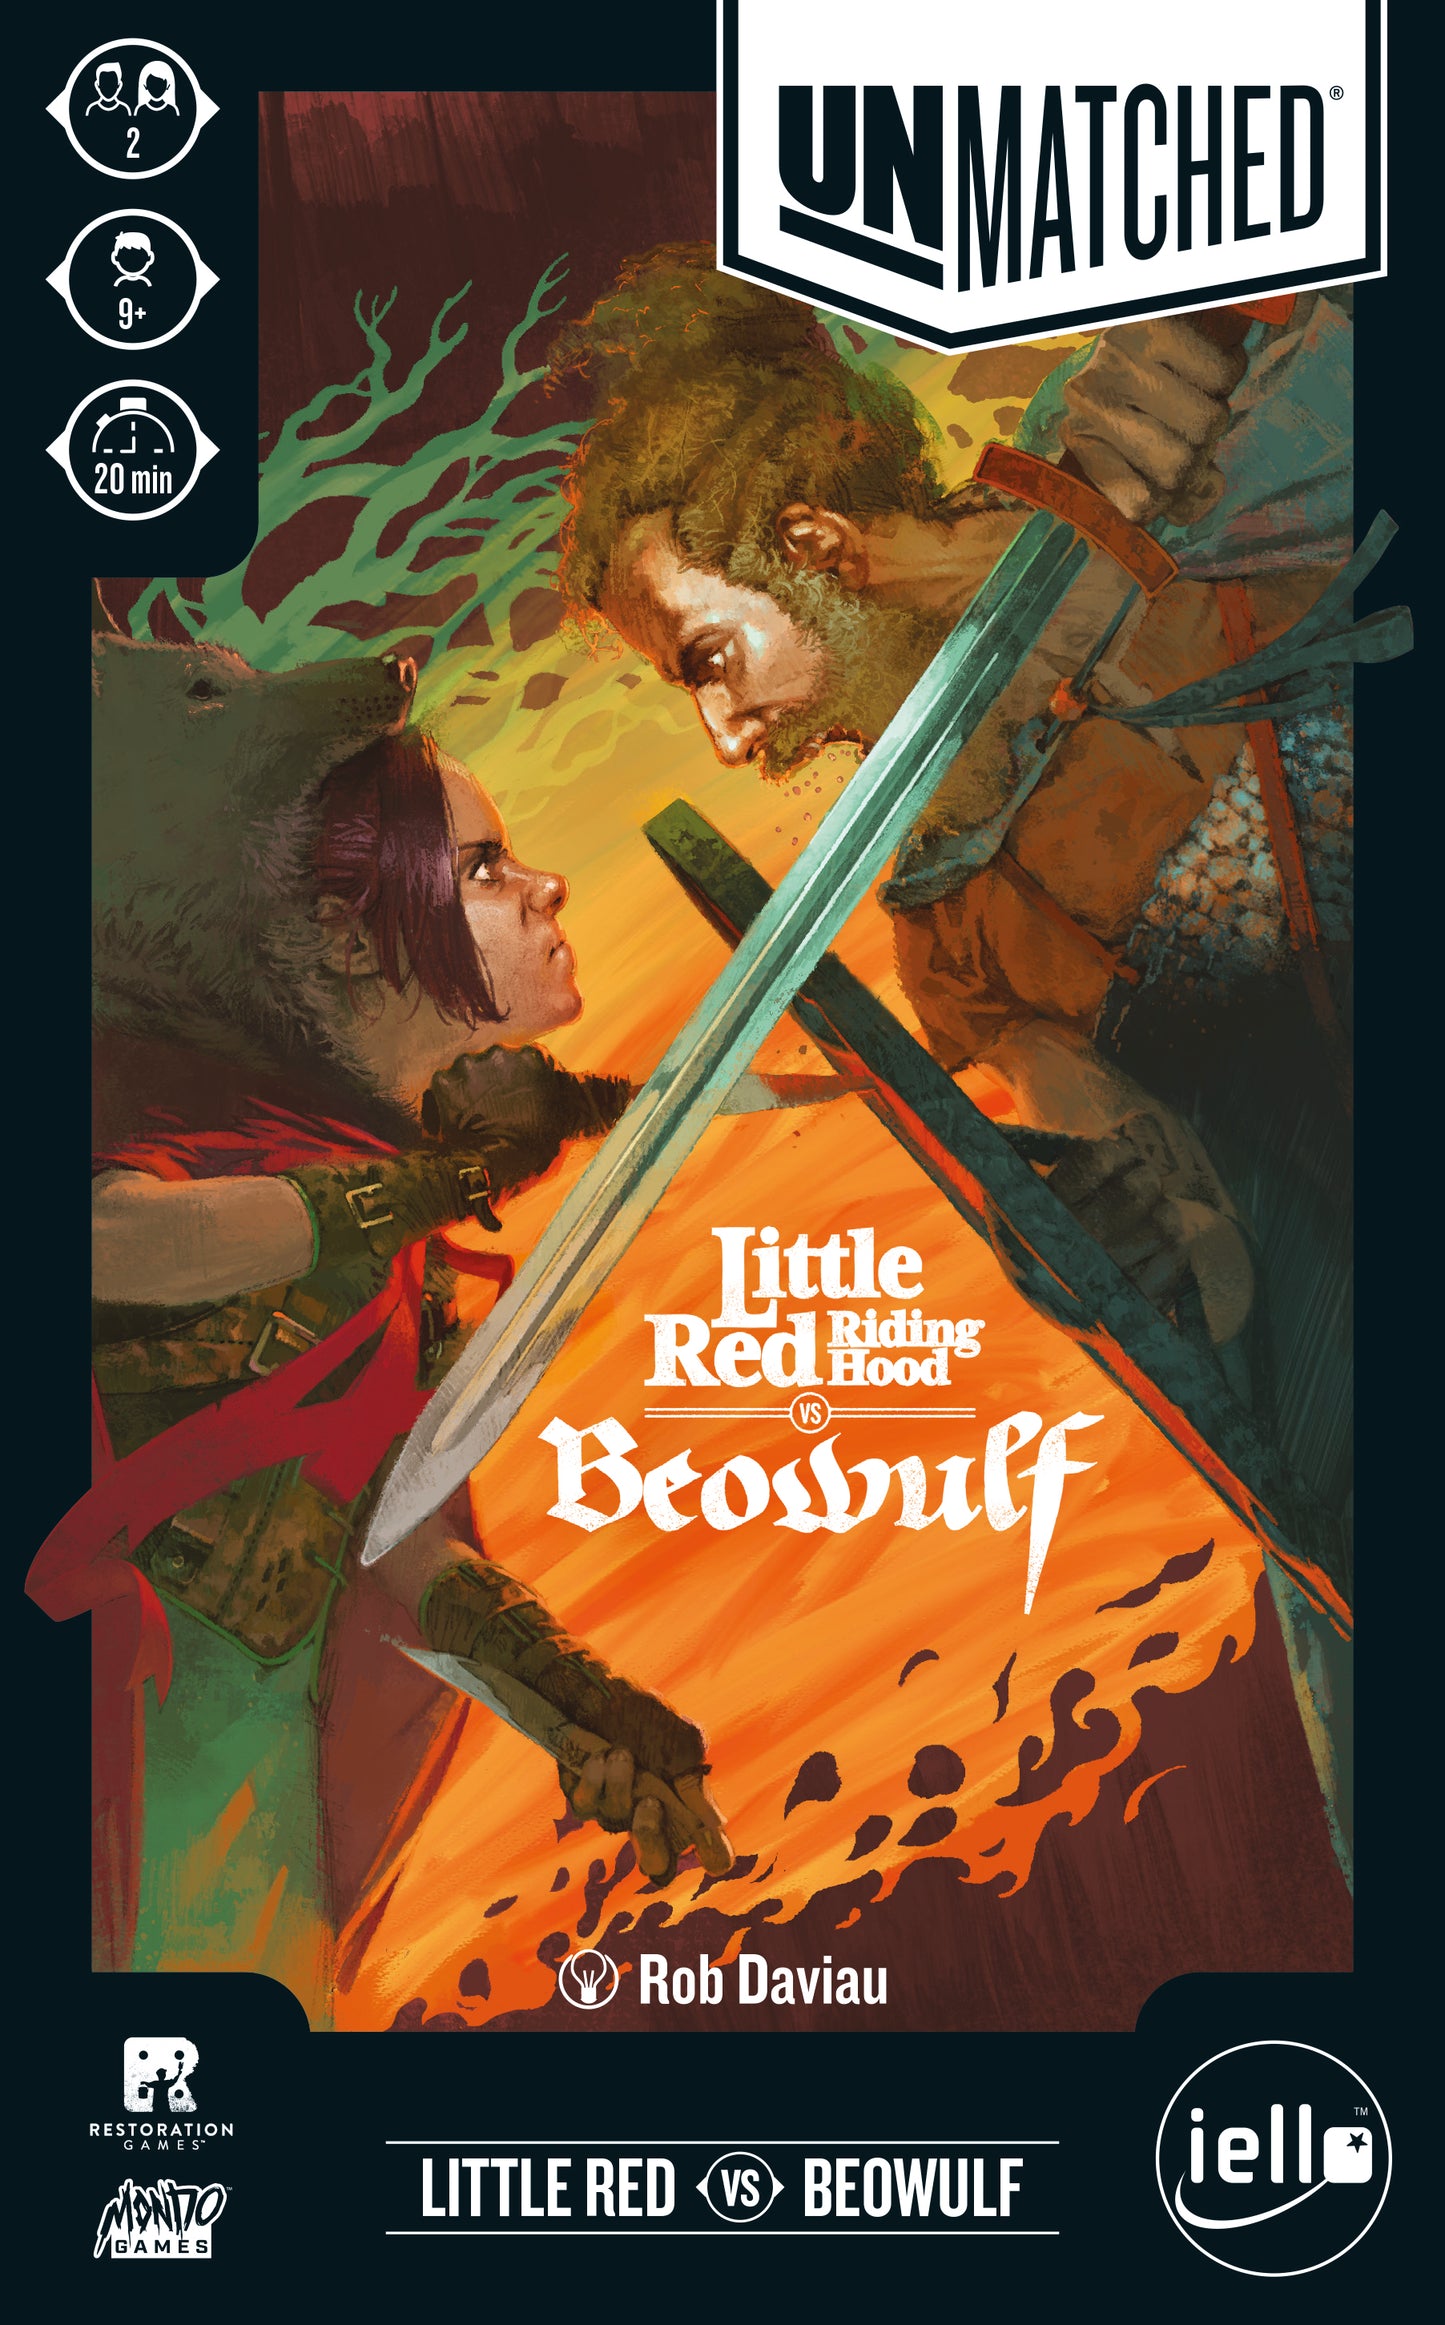 Unmatched Little Red Riding Hood vs Beowulf